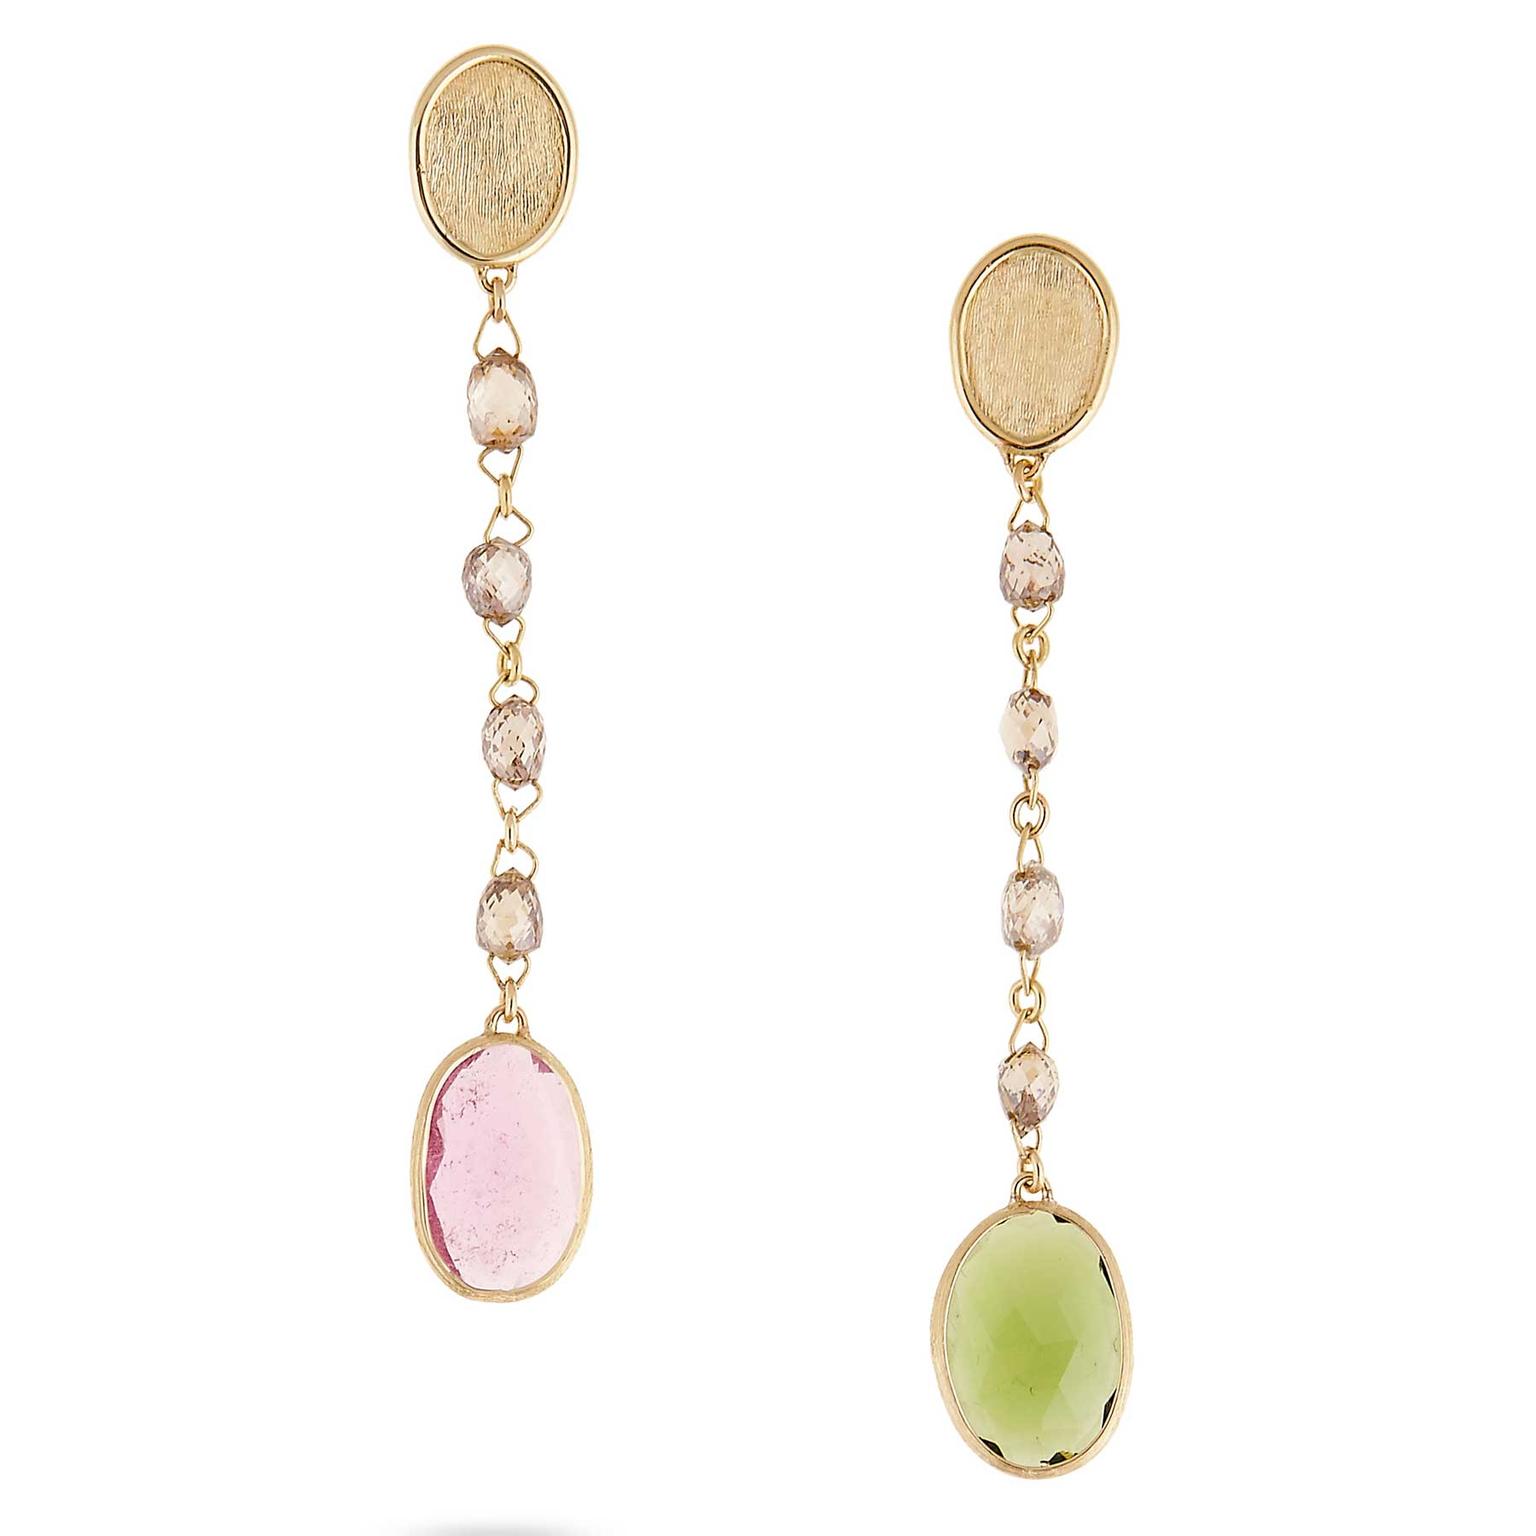 Marco Bicego Unico pink and green tourmaline earrings with brown diamond briolettes